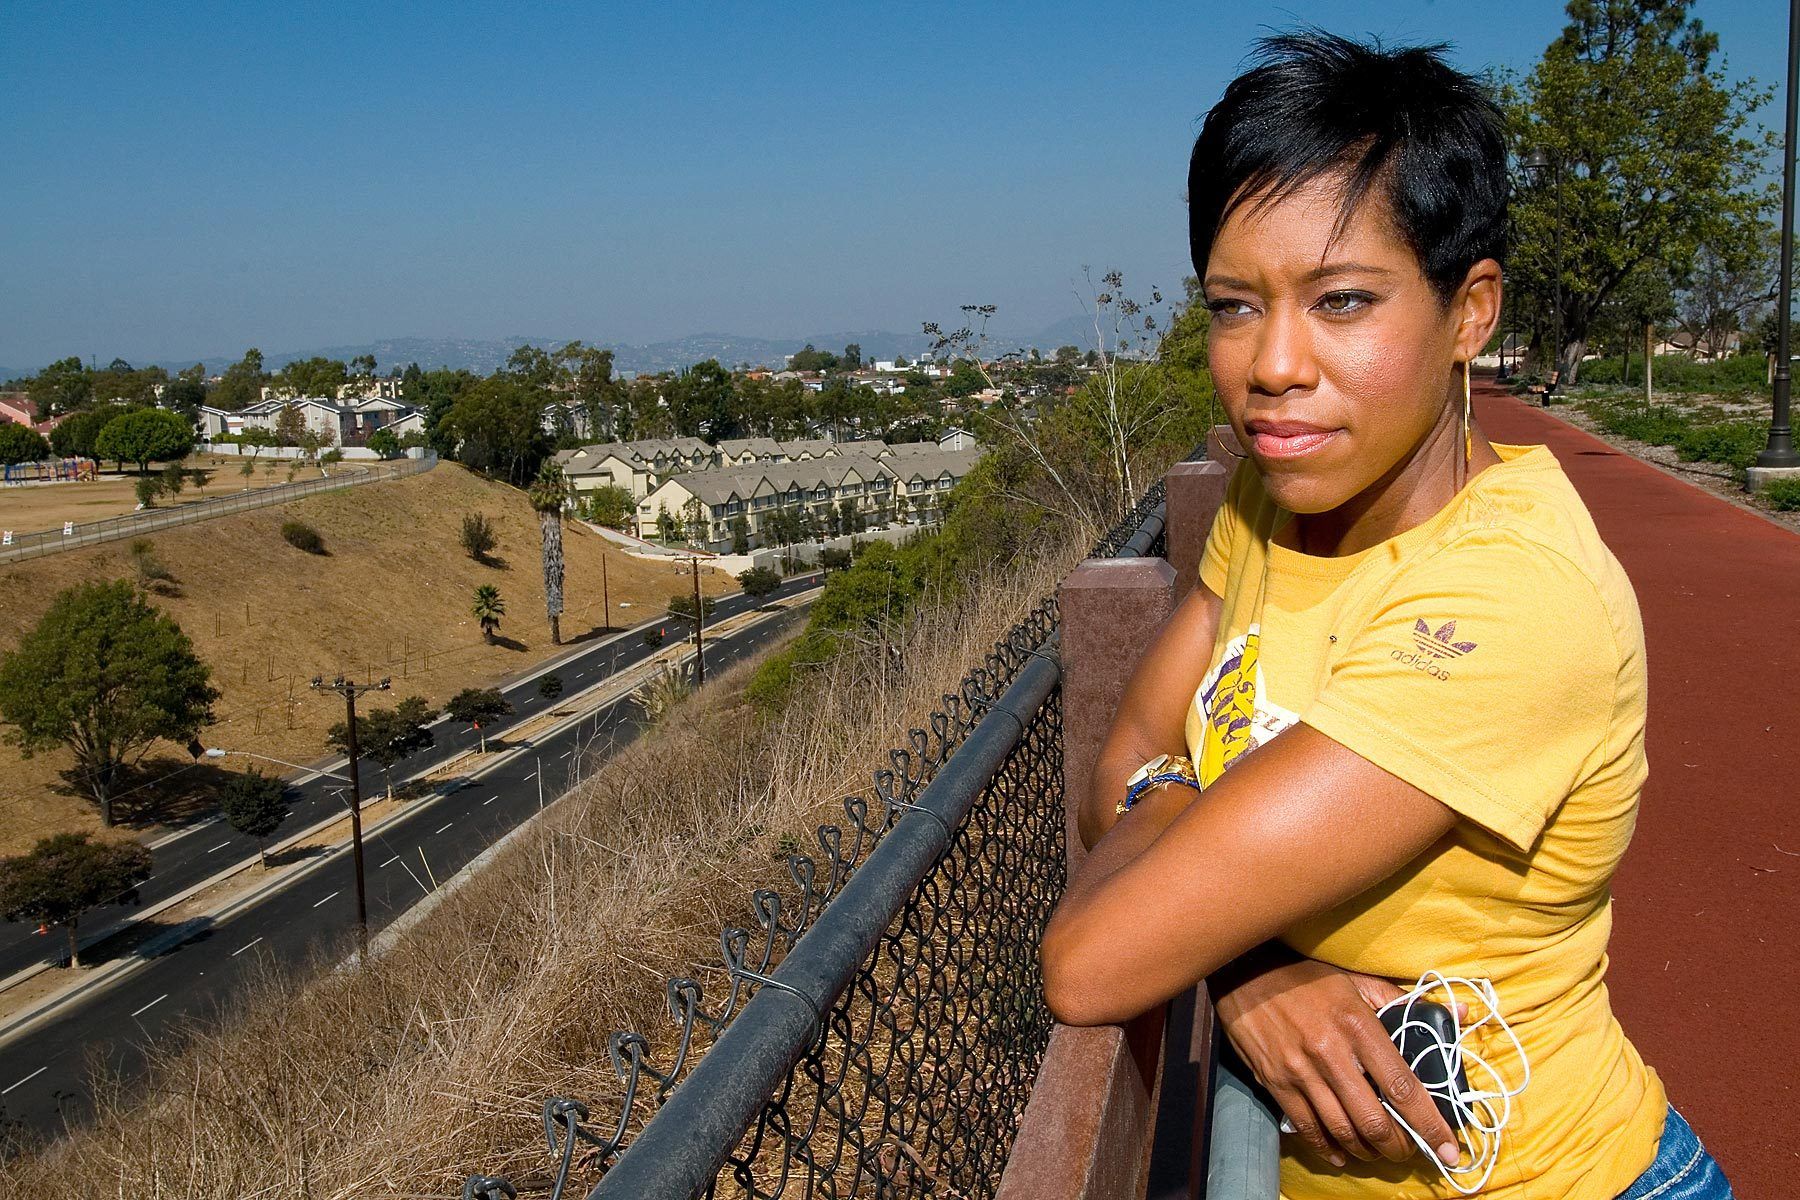 Regina King returns to her childhood turf in South Los Angeles after starring in the TV Show Southland.